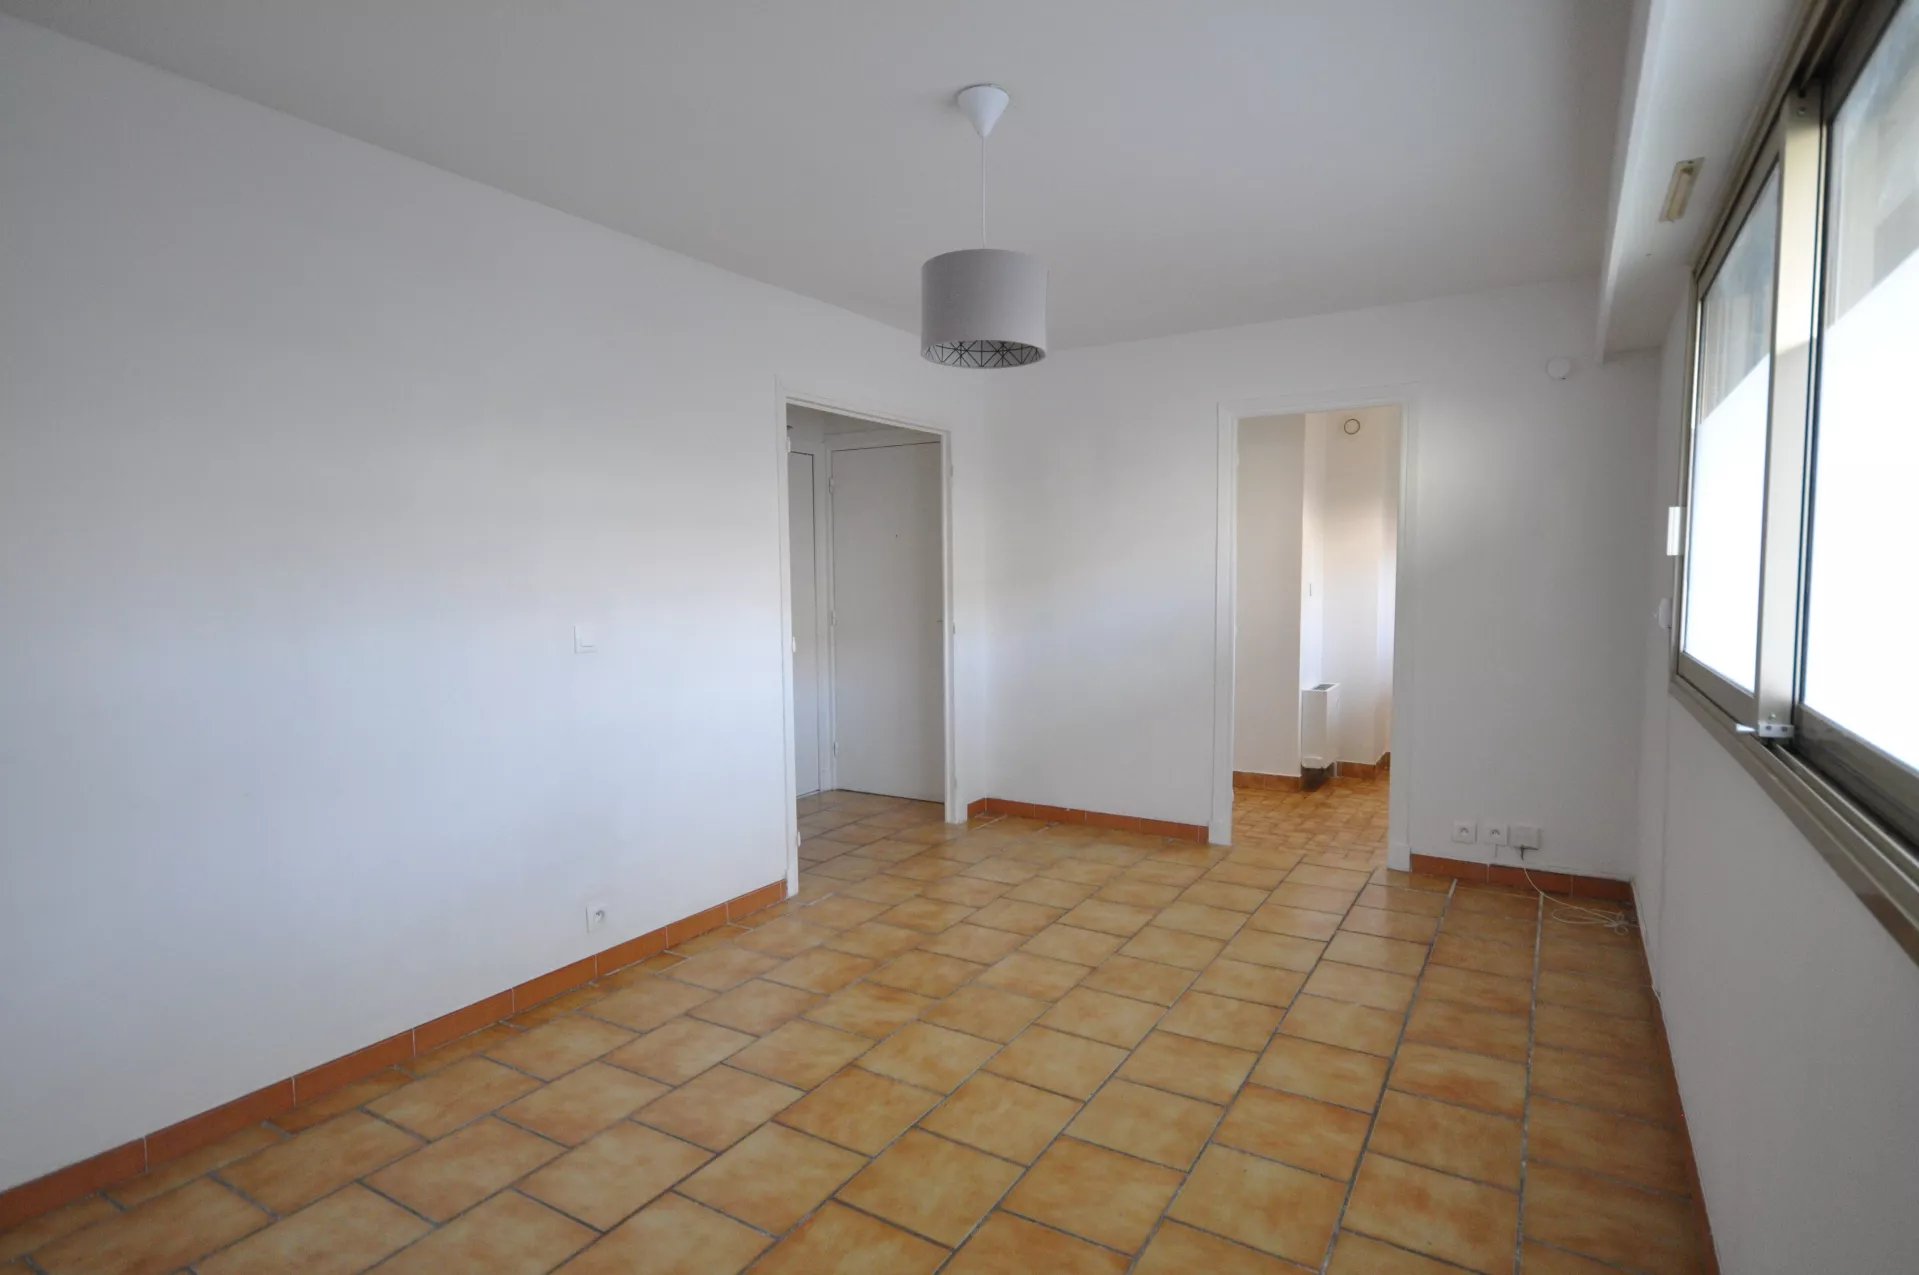 Vente Appartement 27m² à Nice (06300) - Picard-Nath Immo